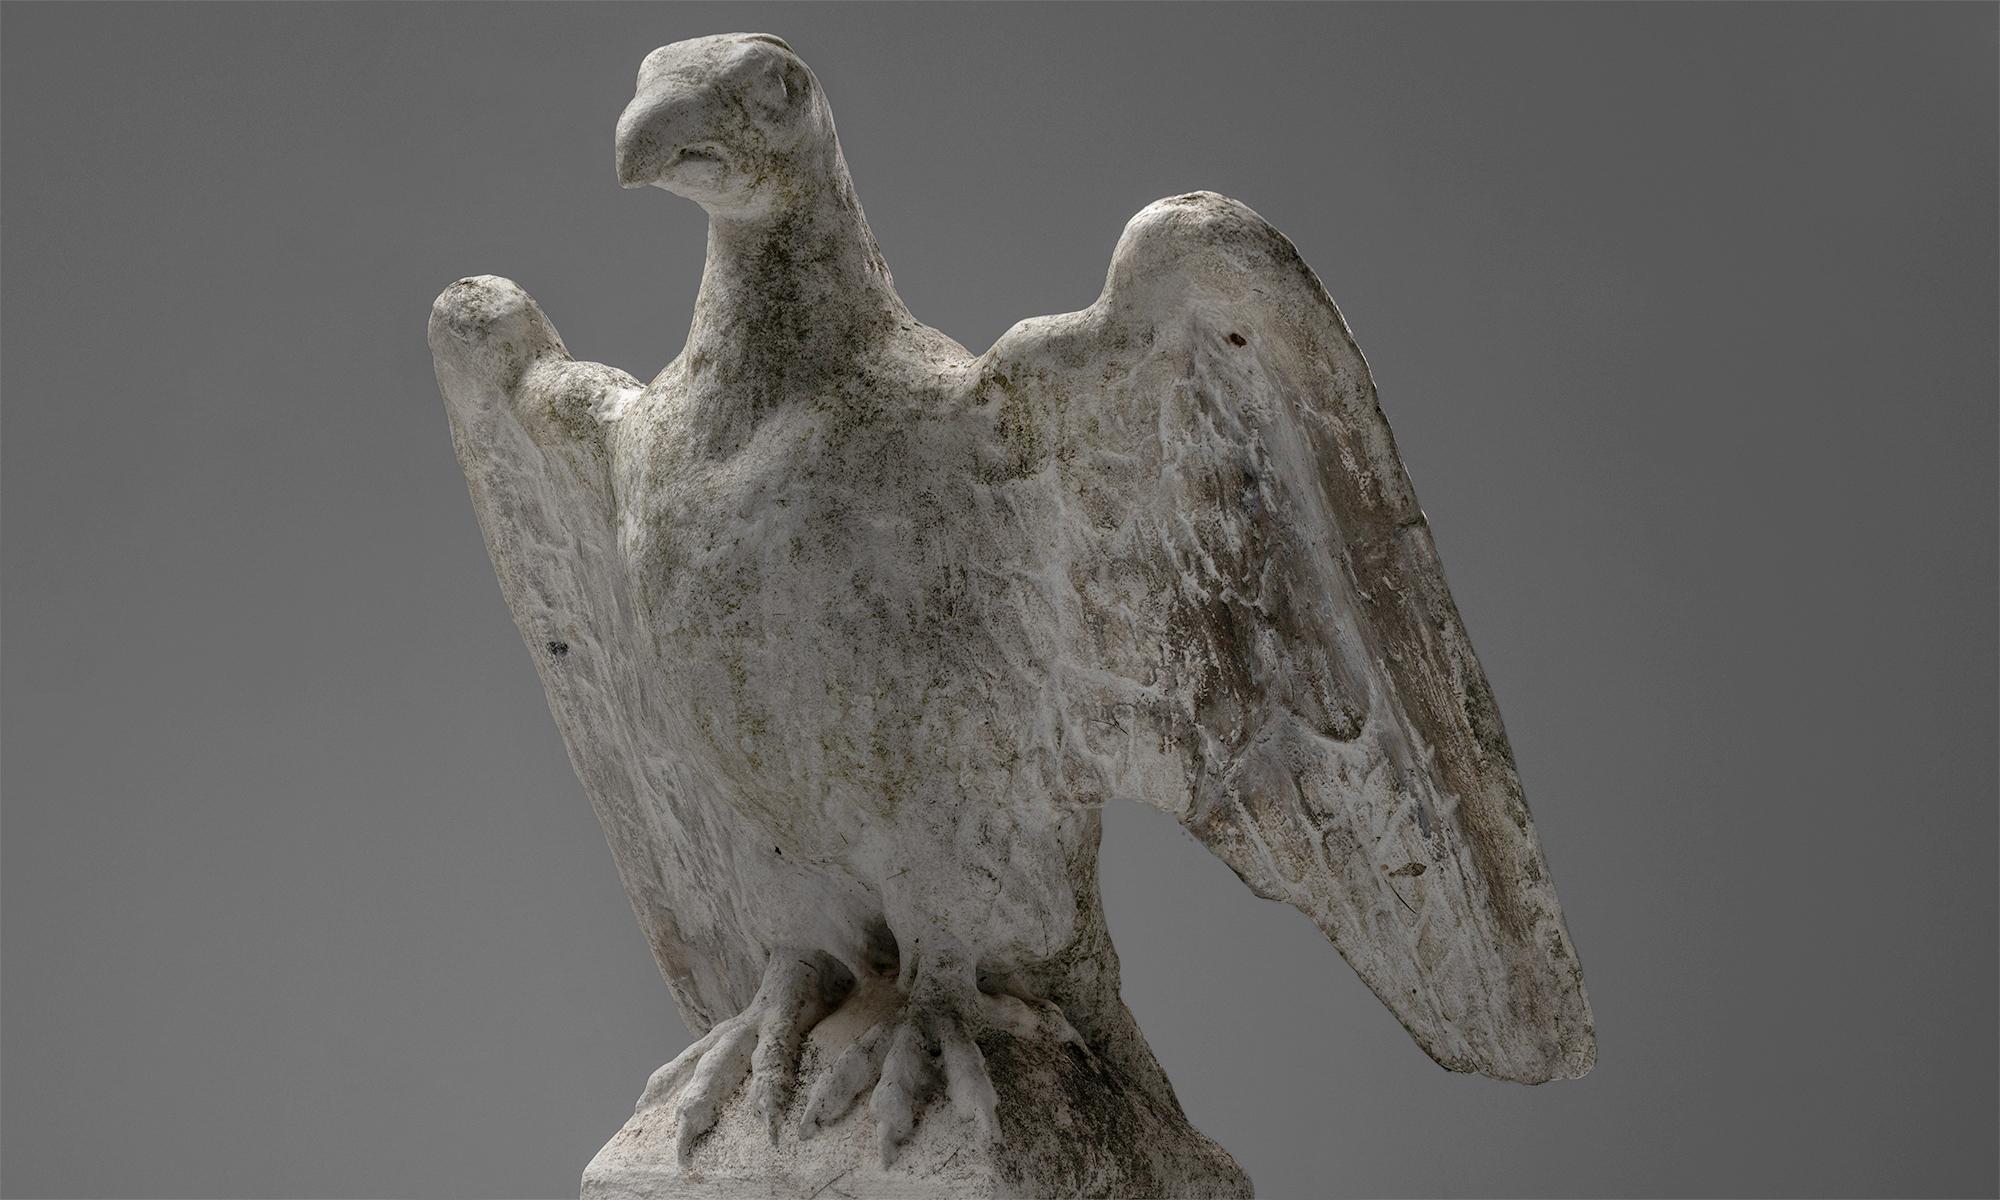 Pair of Marble di Latte Eagles on Stands

England Circa 1940

Sculpted marble eagles on decorative stands.

Measures: 24.25”w x 21.5”d x 45.25”h.